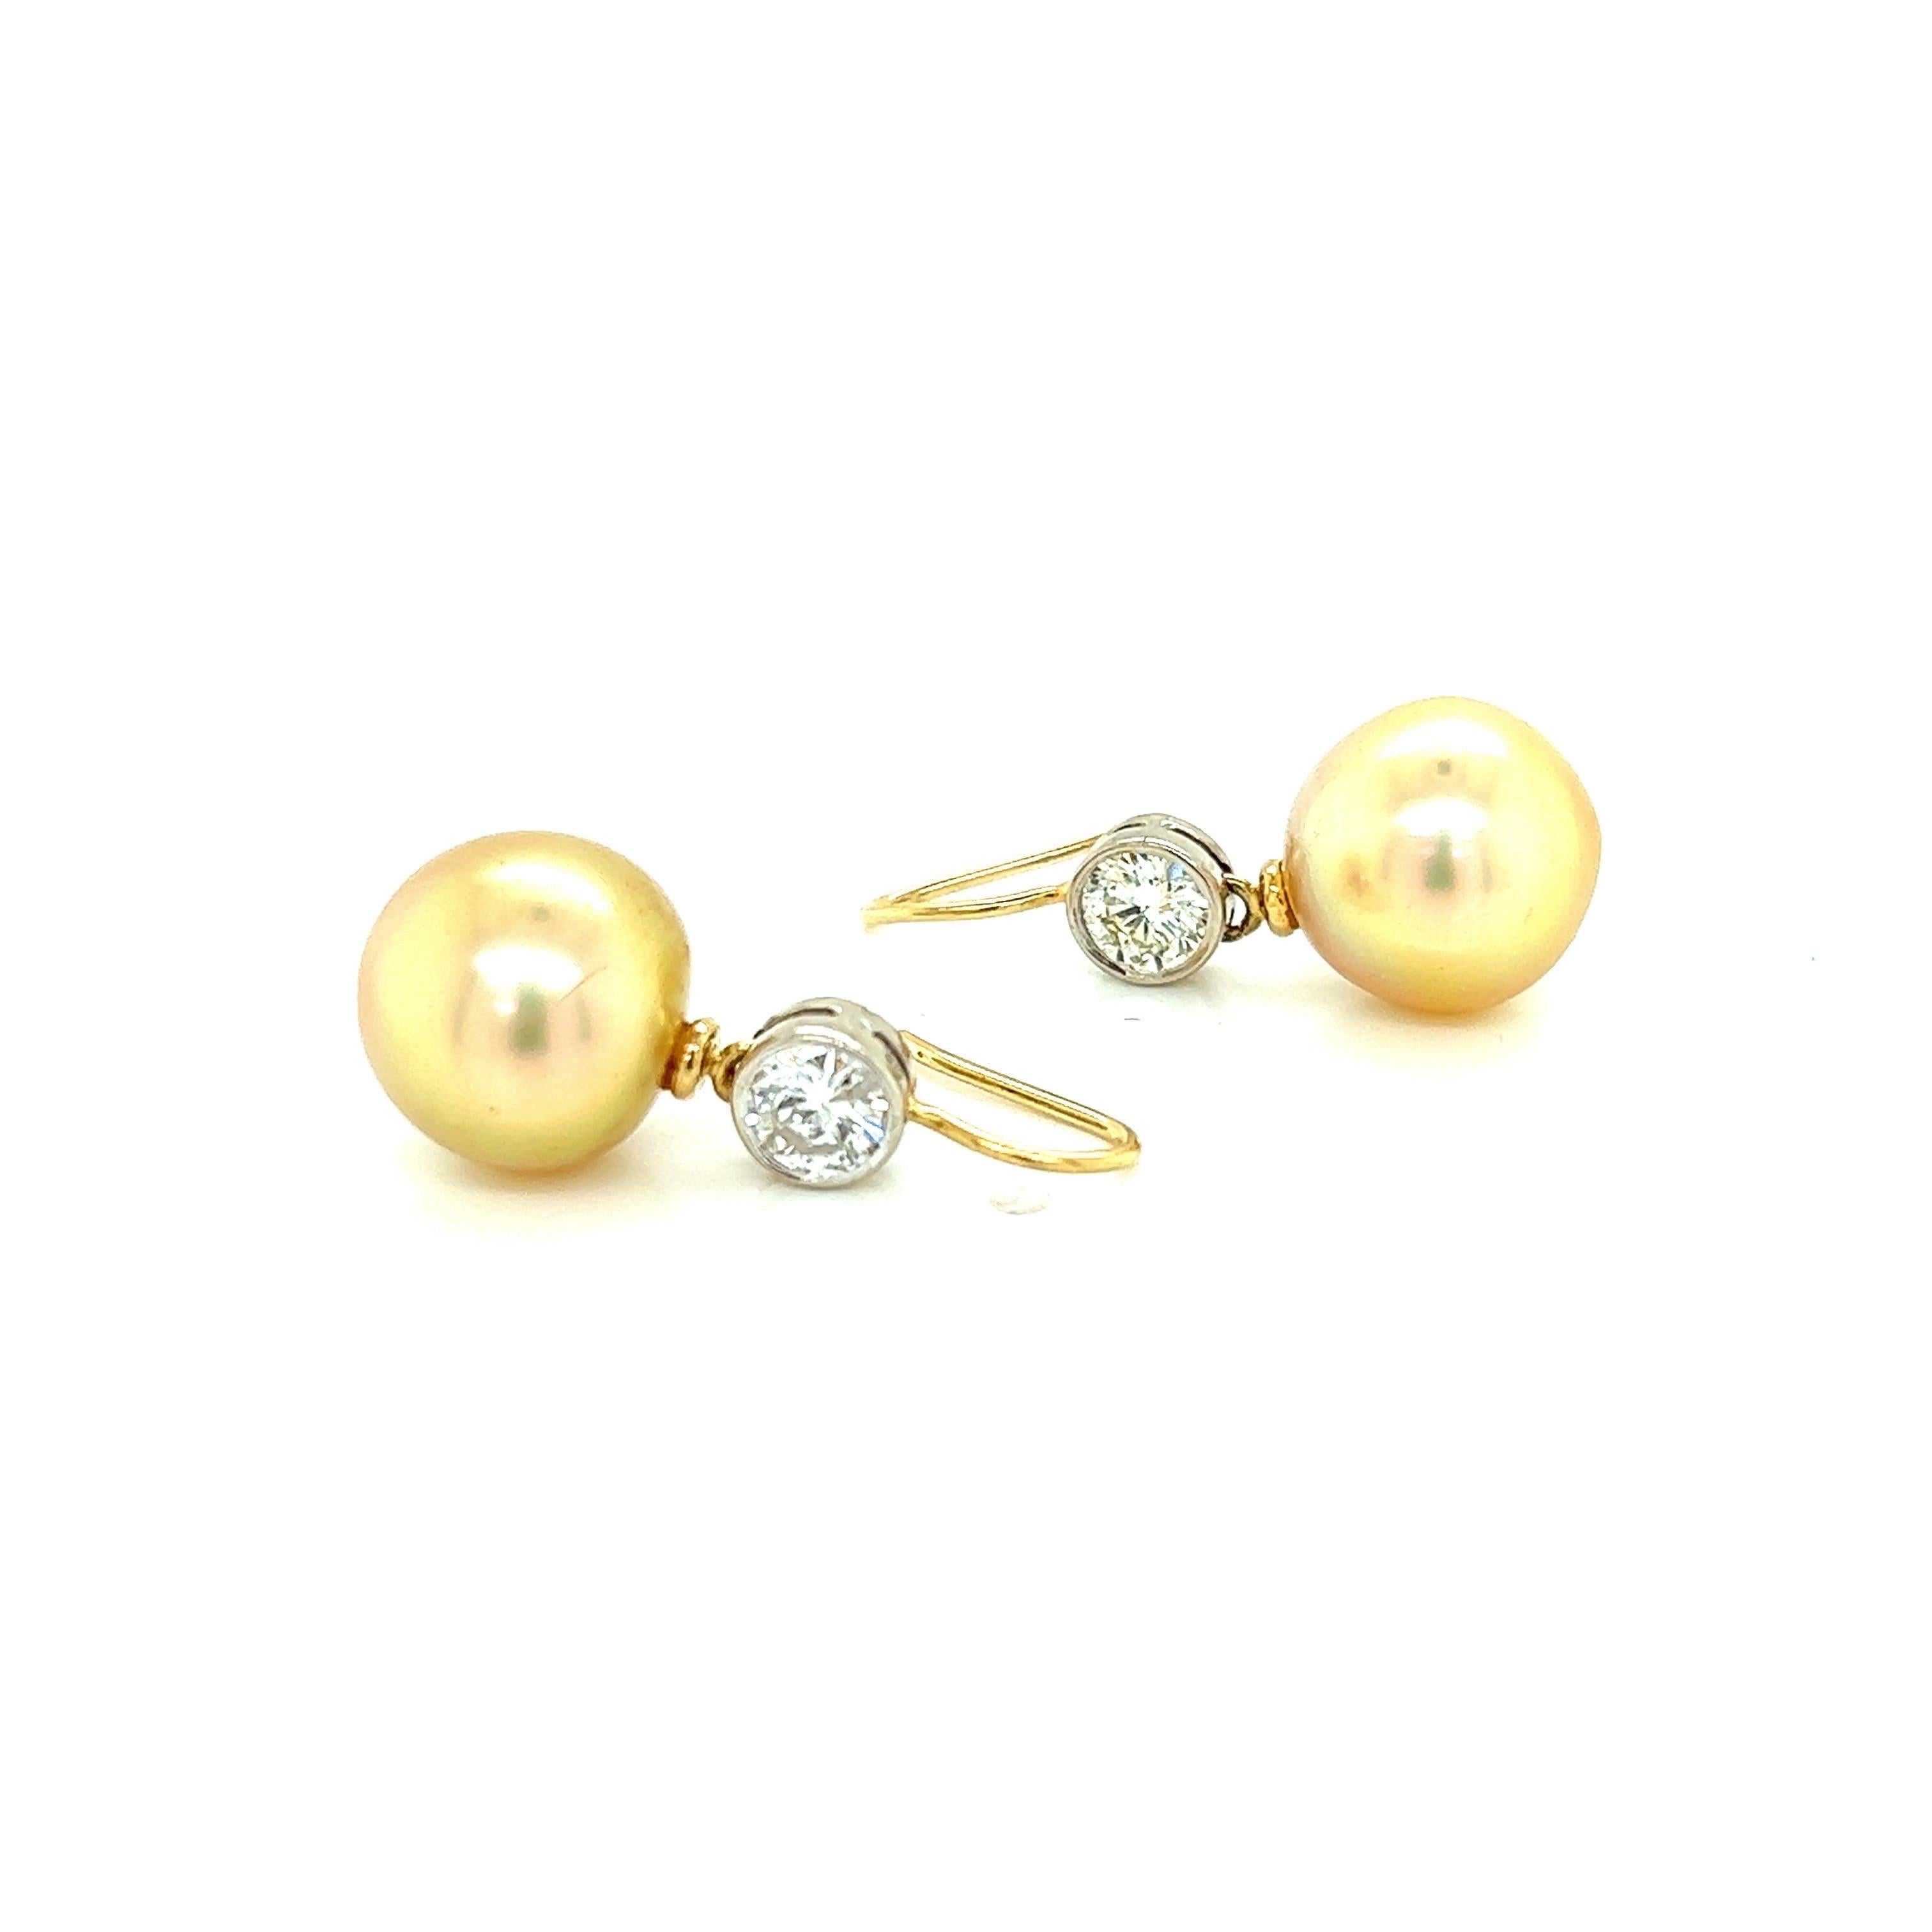 Earrings in 18k yellow and white gold, approx 1tct diamonds, and 11mm yellow South Sea pearl.
Wire hook for pierced ears.

Approximate Length 26.70-28.80mm